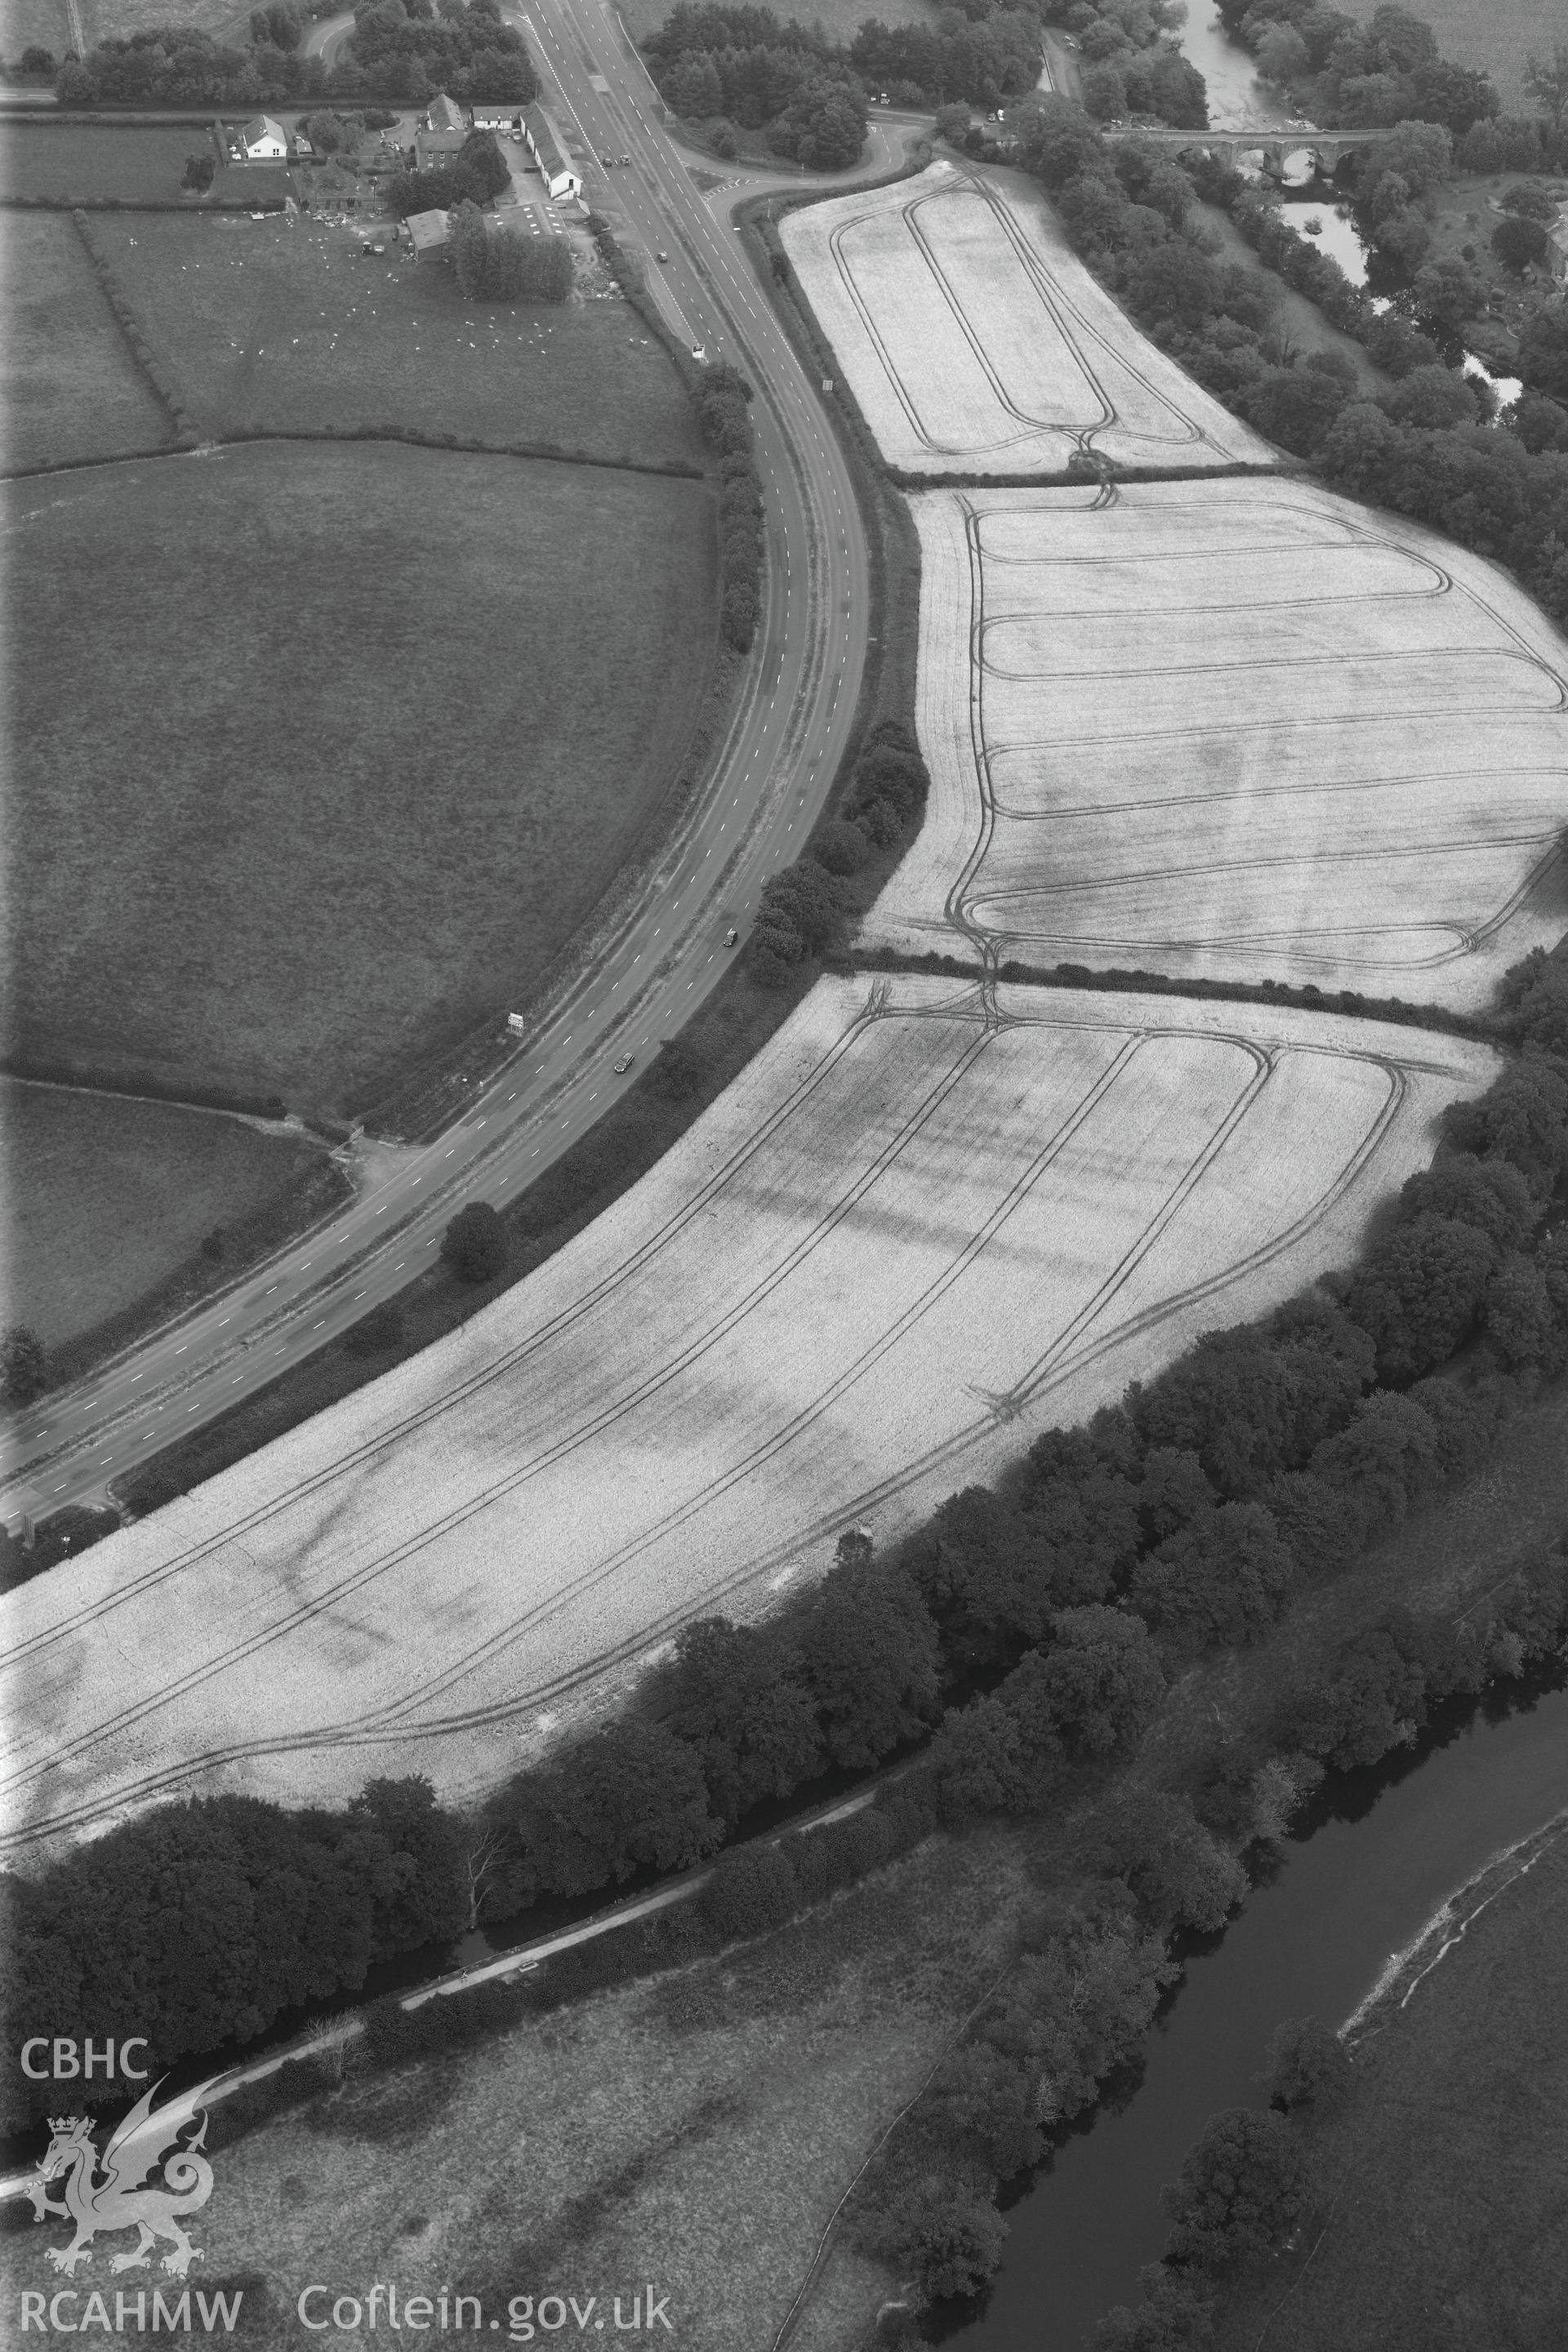 Cefn-brynich Roman fort, detailed view (black and white) of cropmarks from west, taken by RCAHMW 1st August 2013.